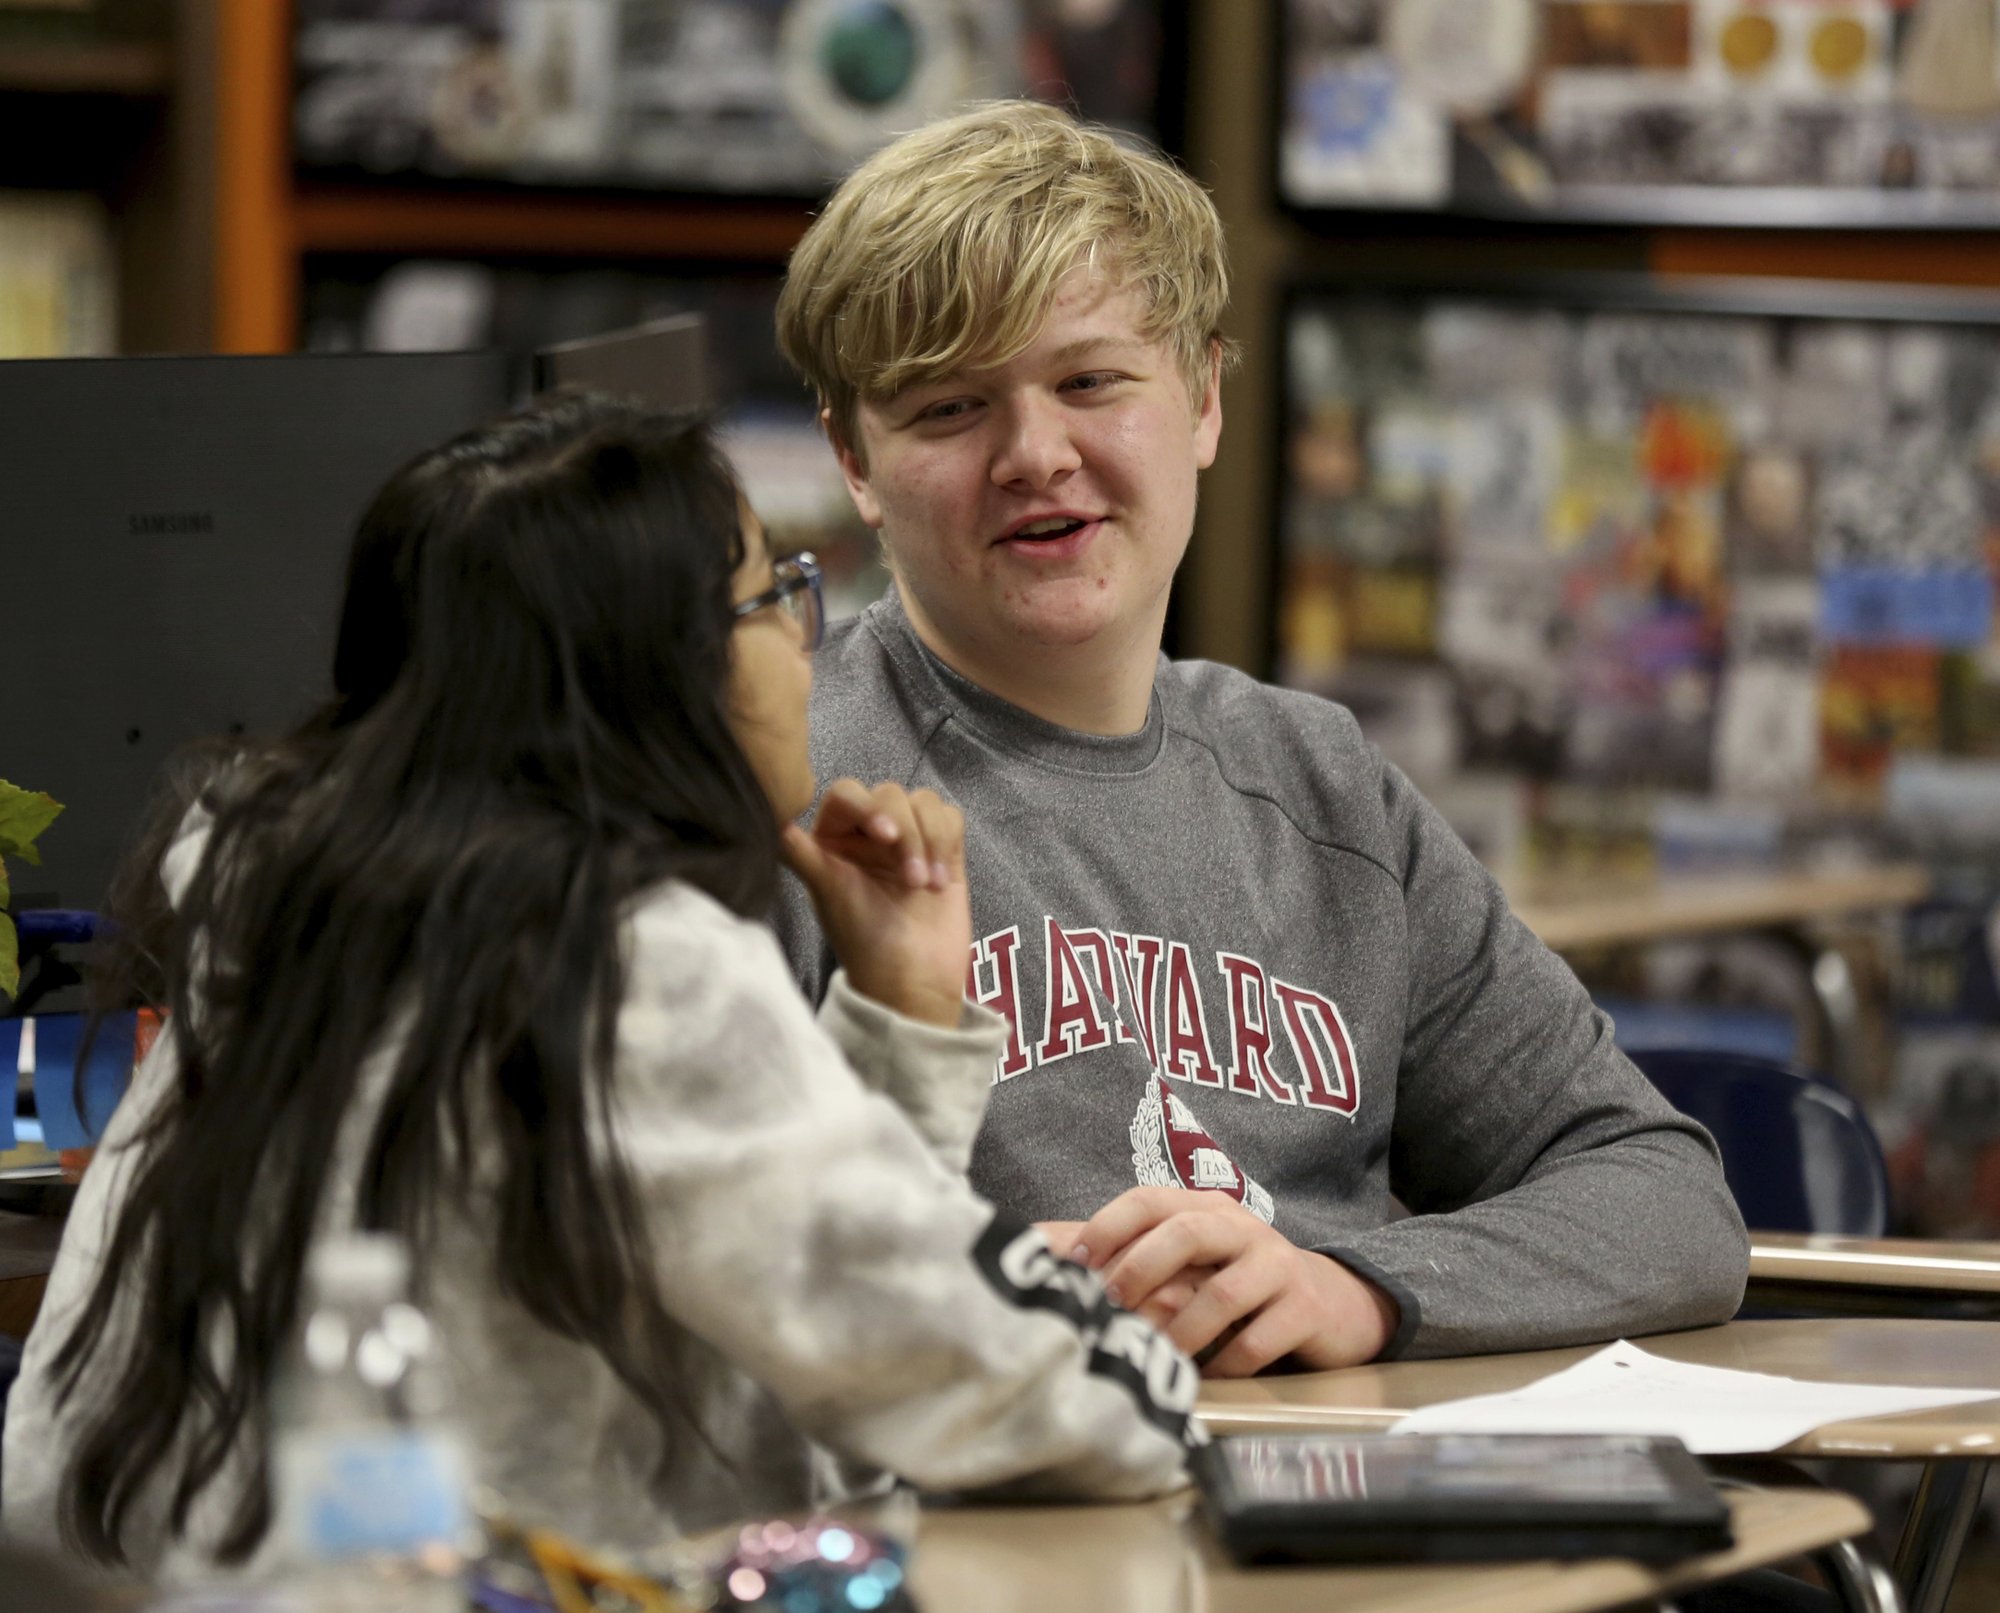 Government class students Alejandra Corral, left, and Braxton Moral work on calculating the estimated cost of living expenses as part of a talk about students who graduate high school making on average more money than non-graduates, at Ulysses High School in Ulysses, Kan., on Wednesday, Dec. 12, 2018. Photo: AP